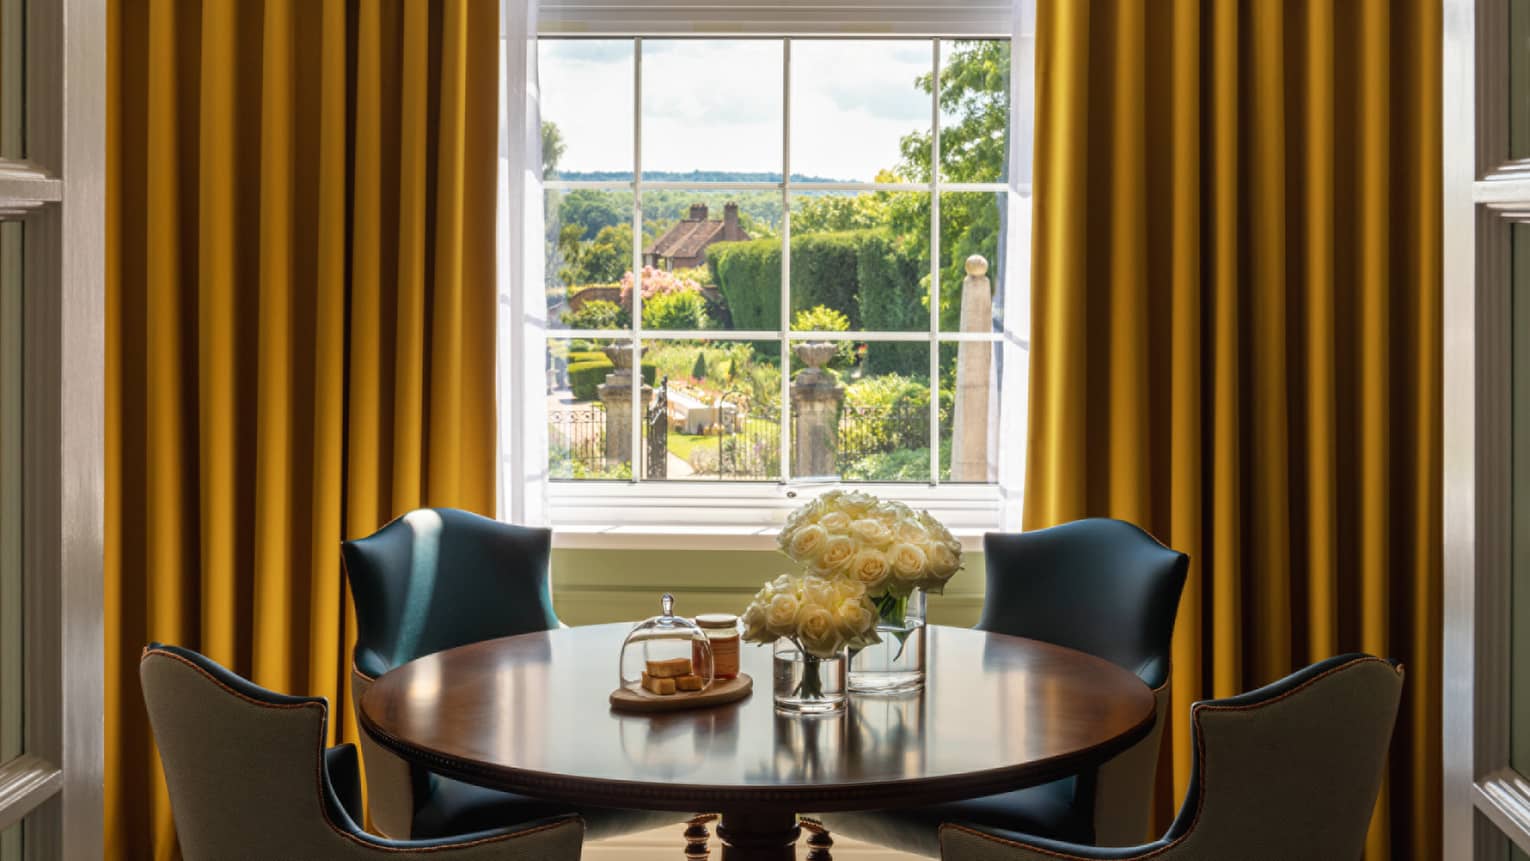 Small round table with four leather chairs, window with yellow drapes overlooking the garden